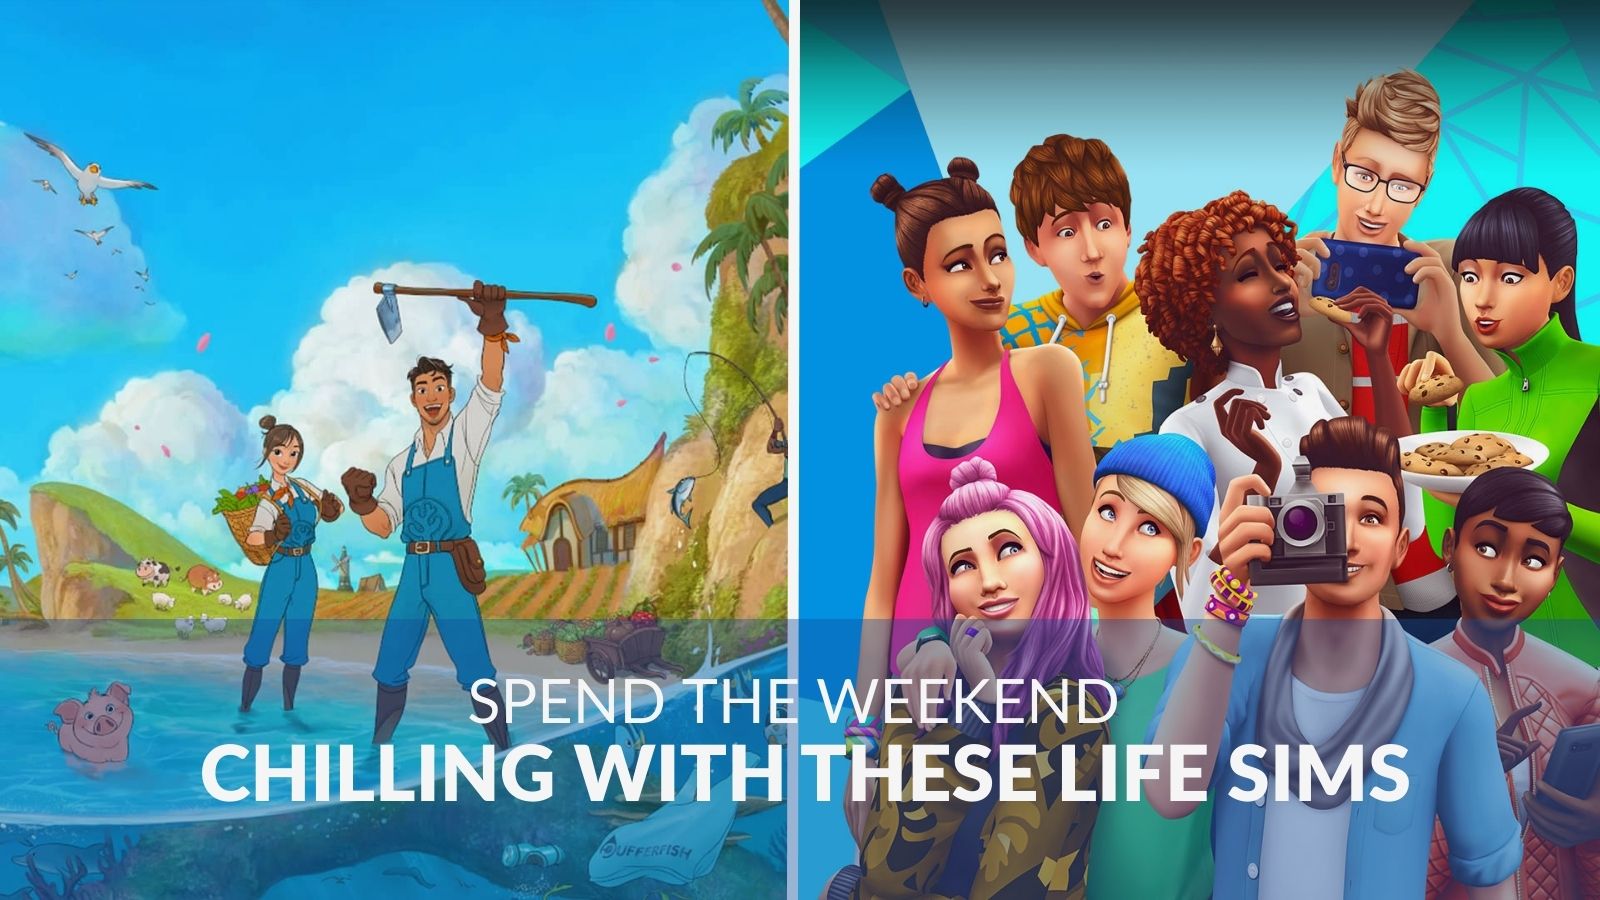 Spend the Weekend Chilling with These Life Sims